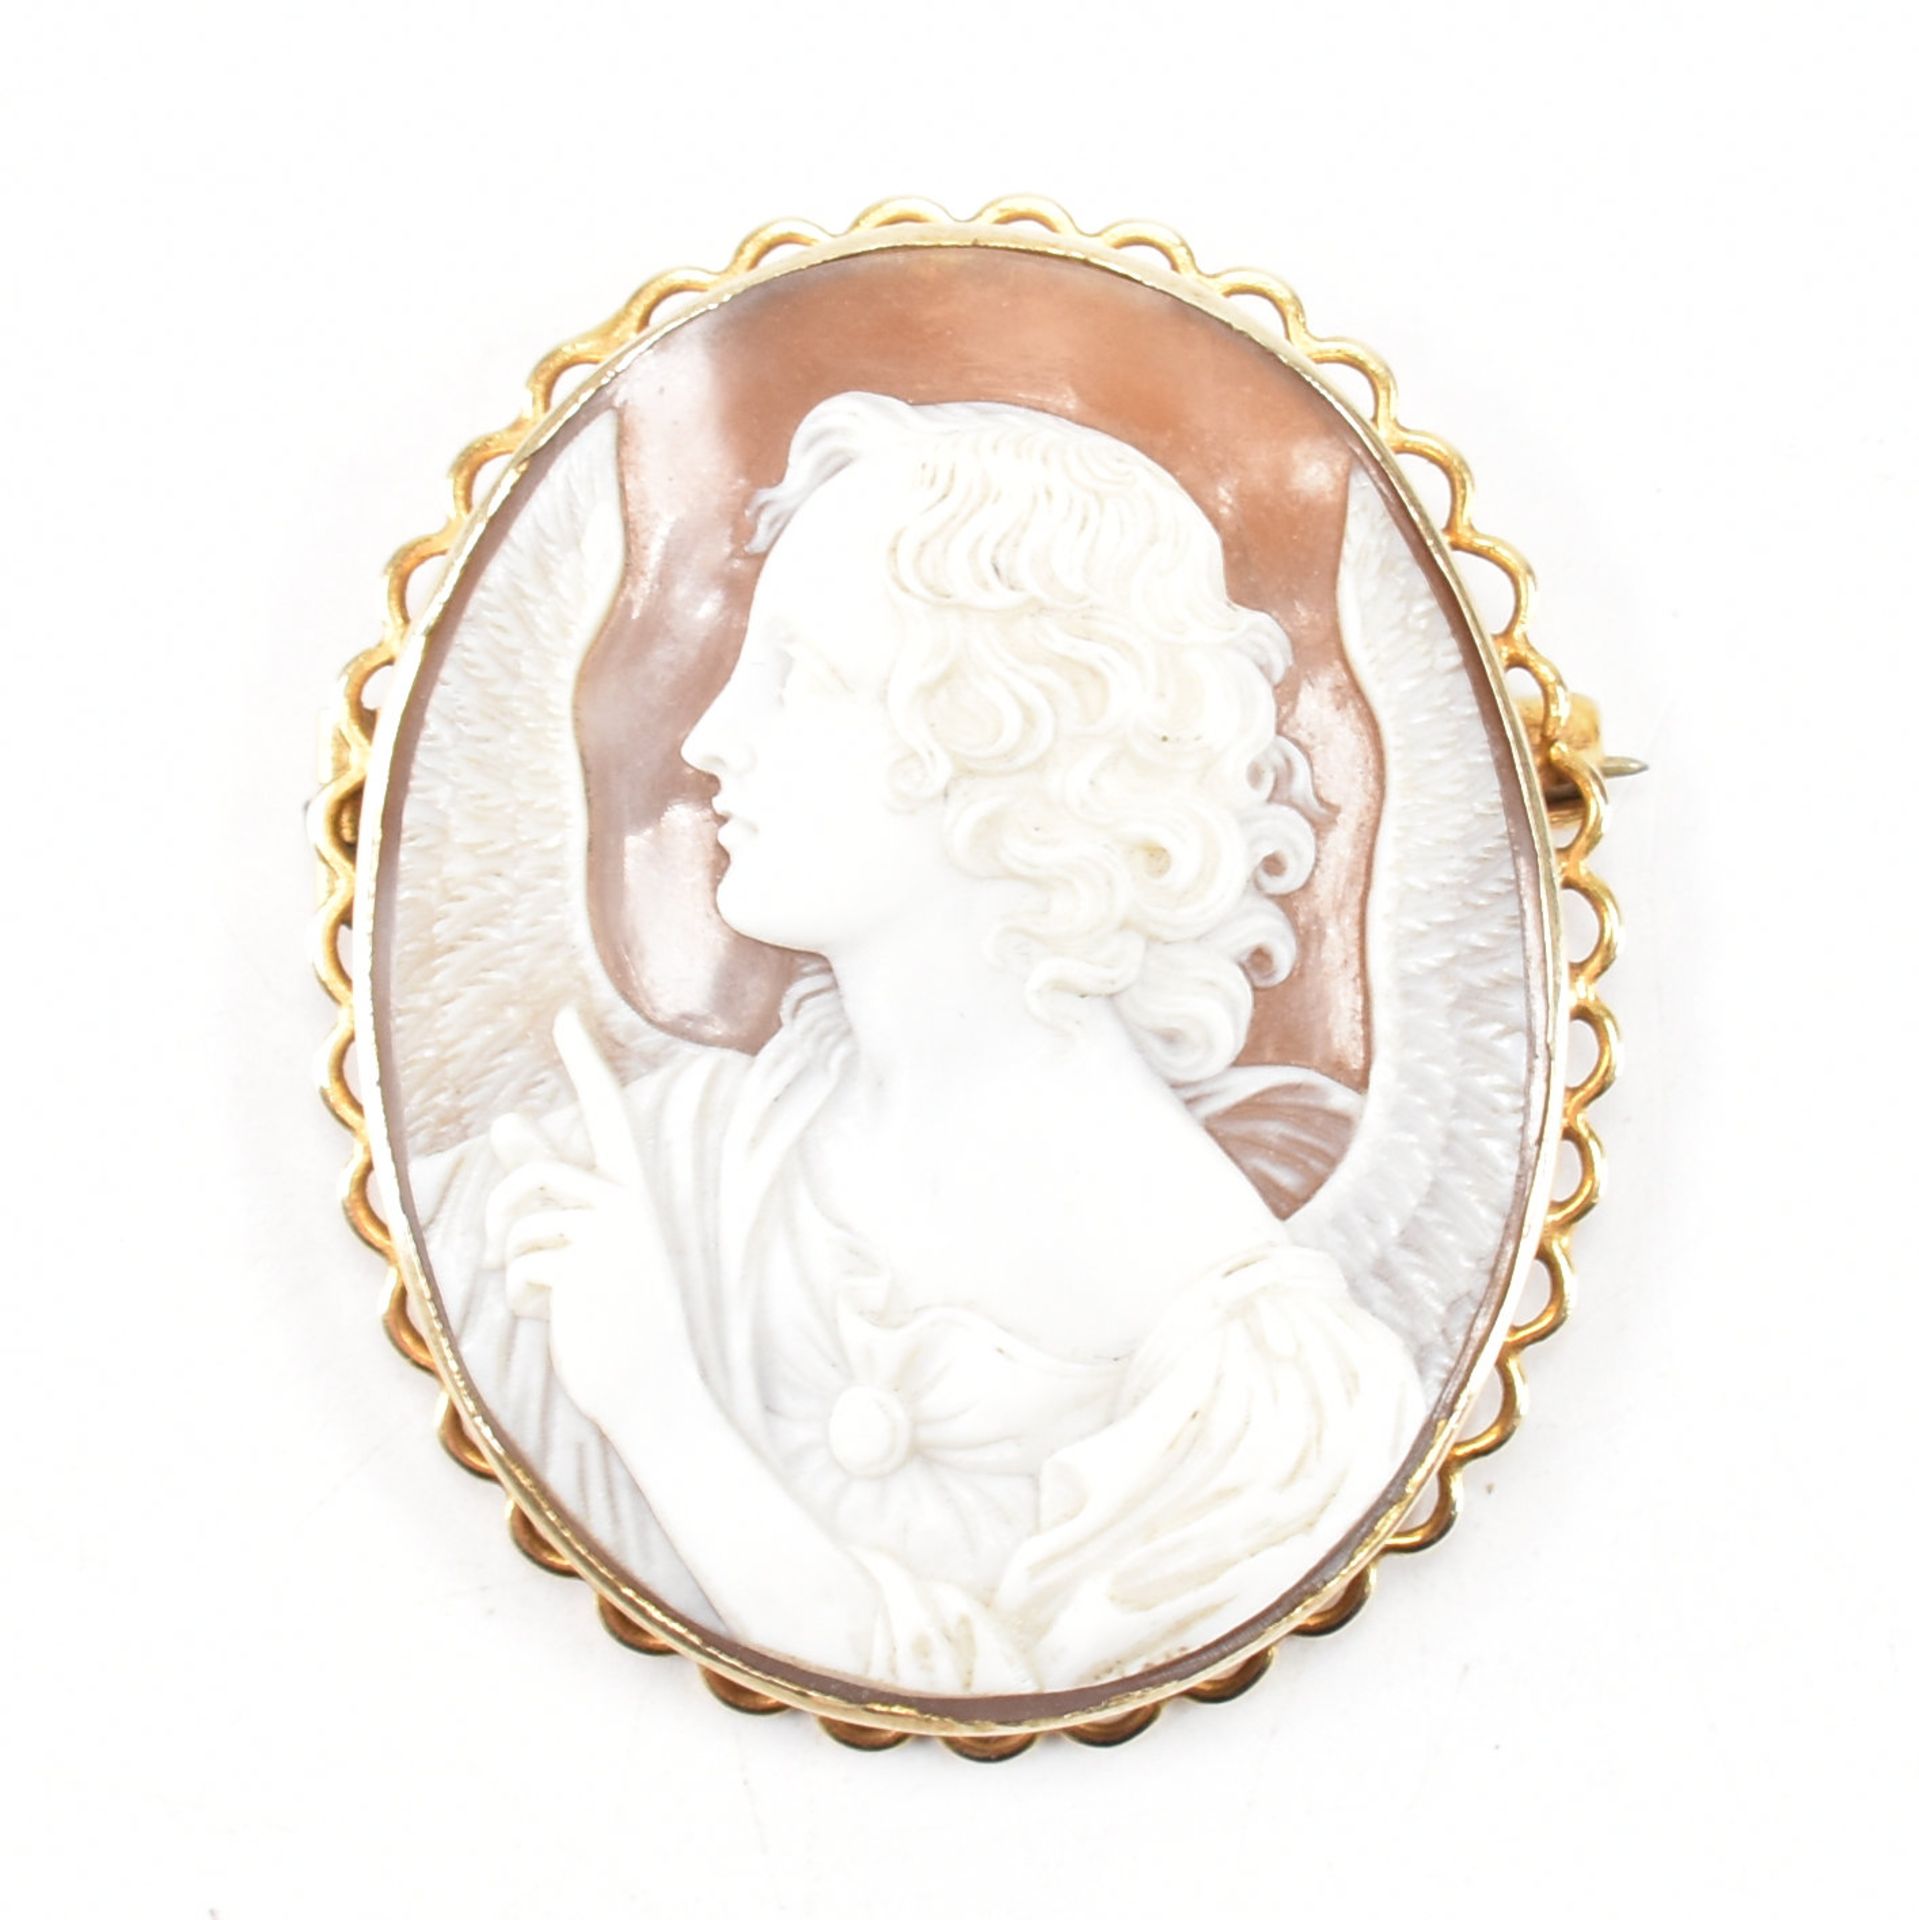 20TH CENTURY GOLD MOUNTED CARVED CAMEO BROOCH